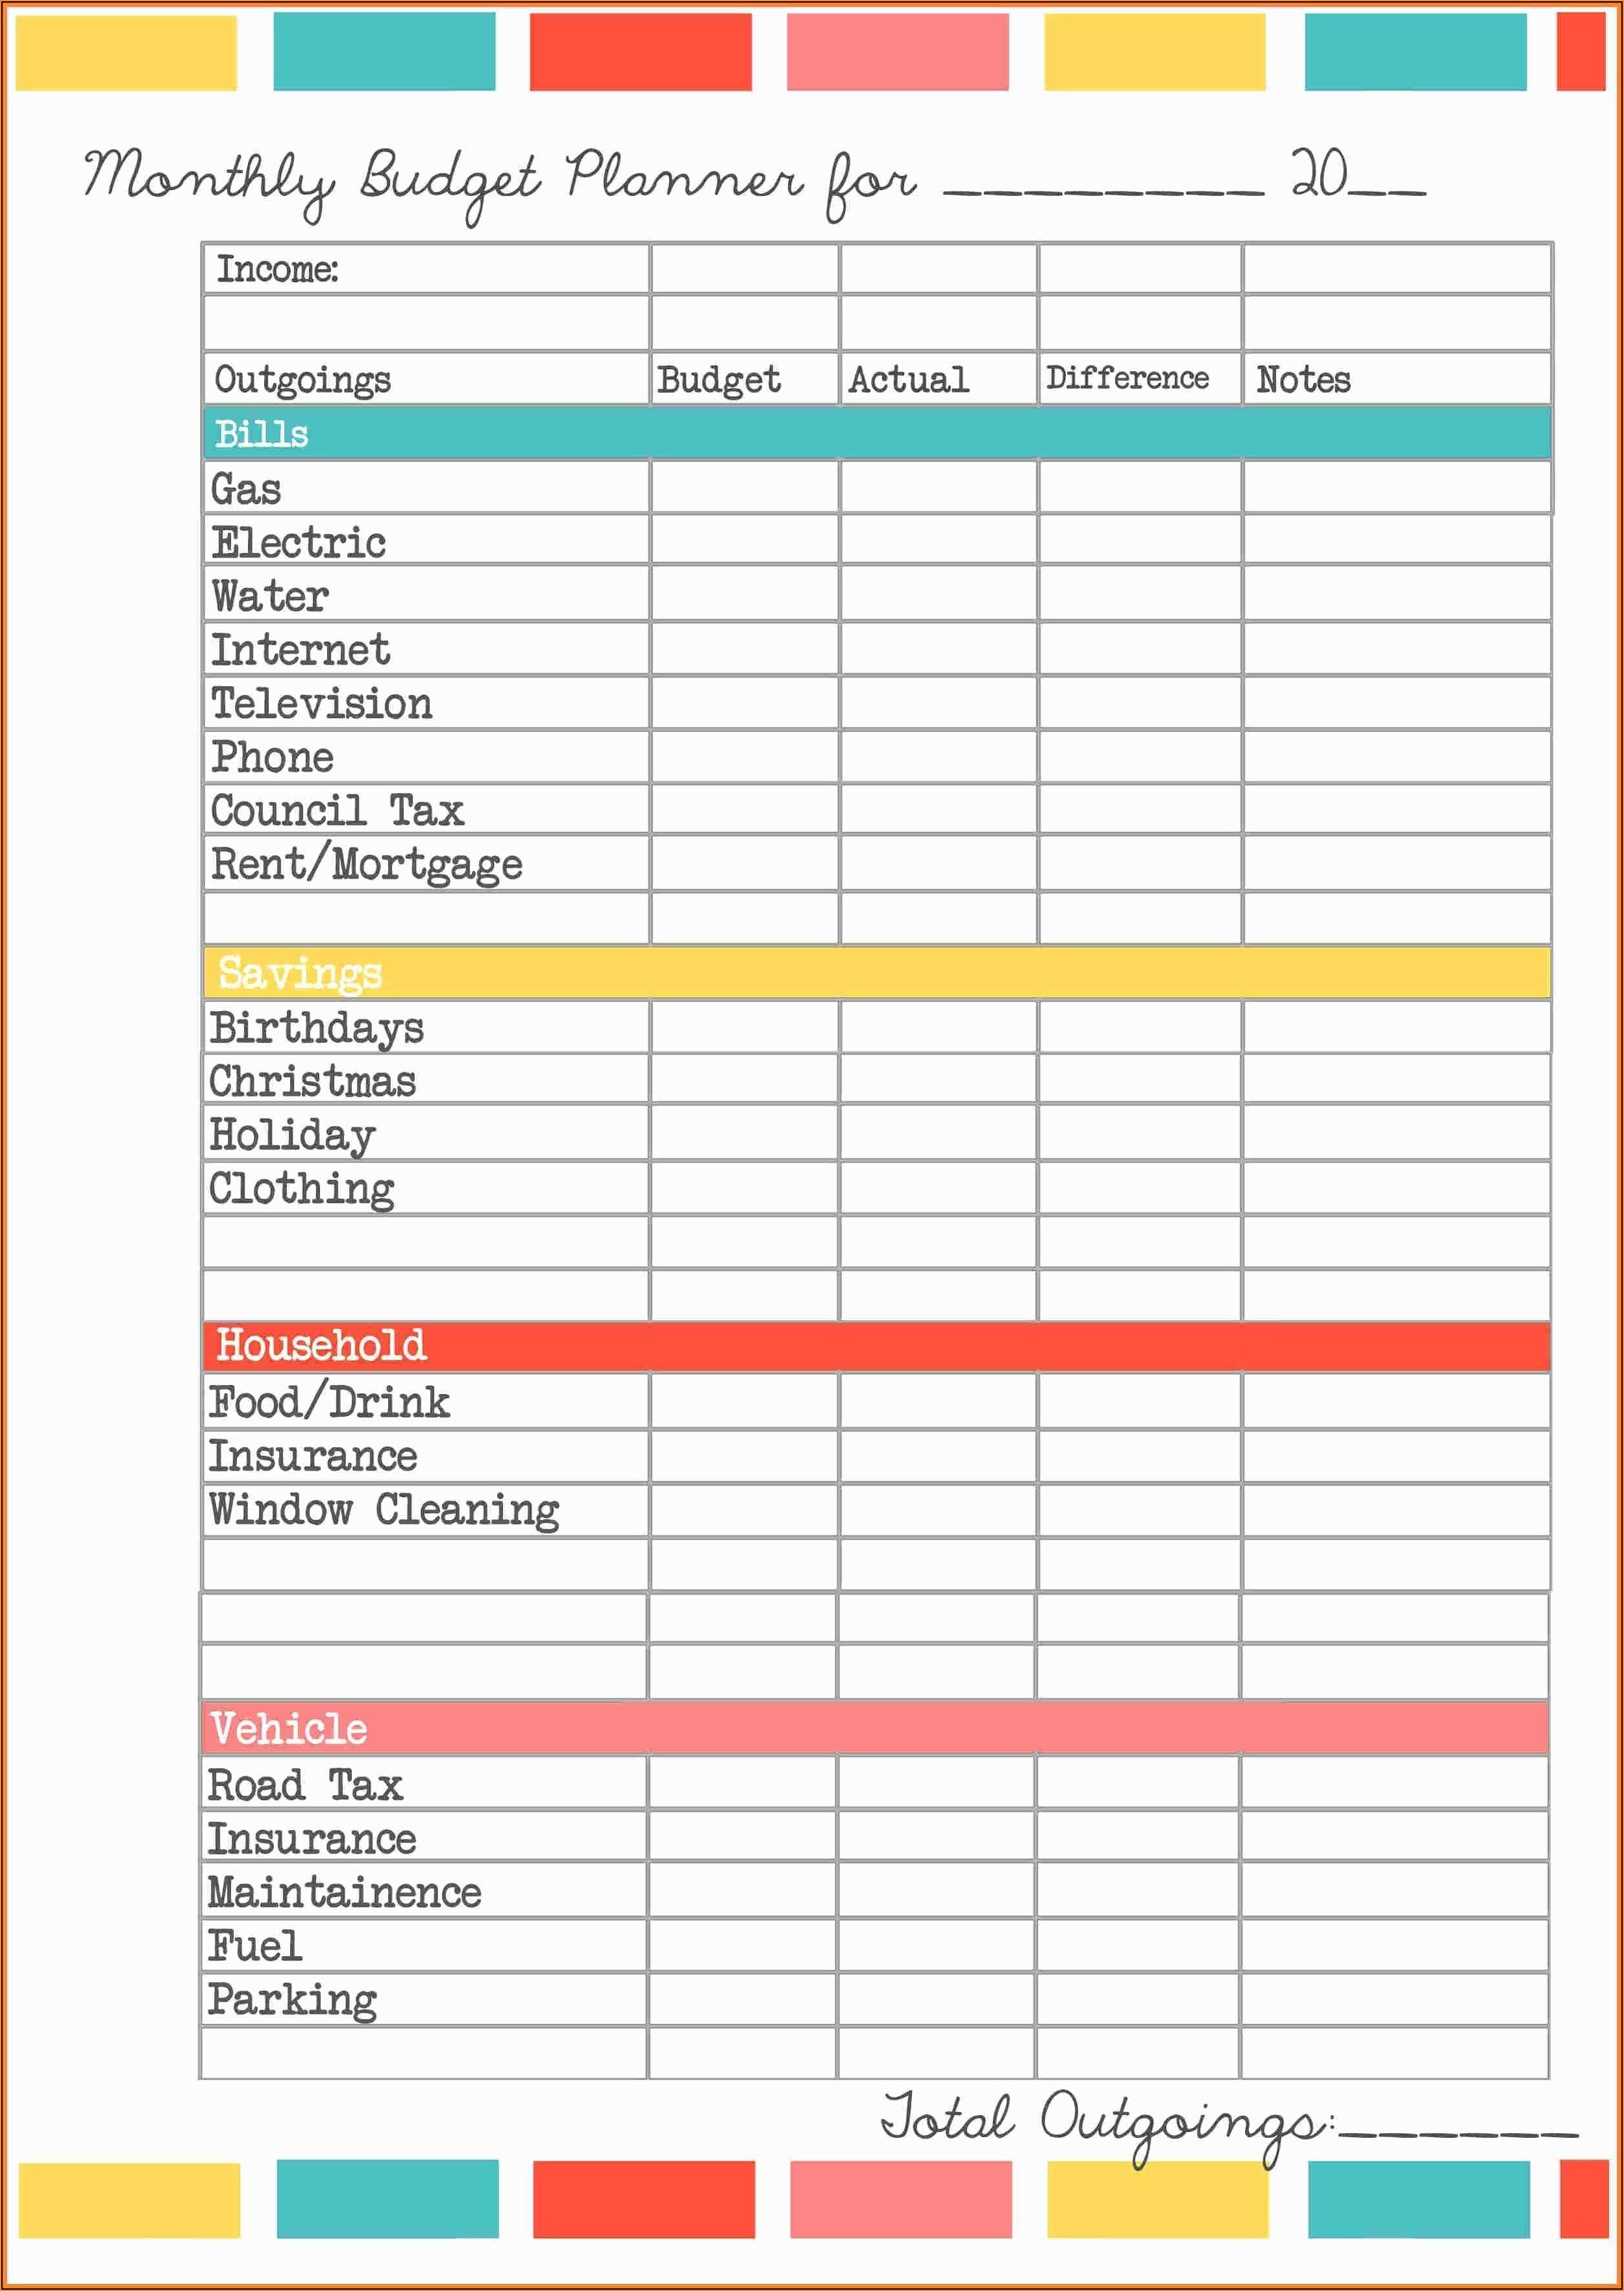 Project Budget Plan Template Excel